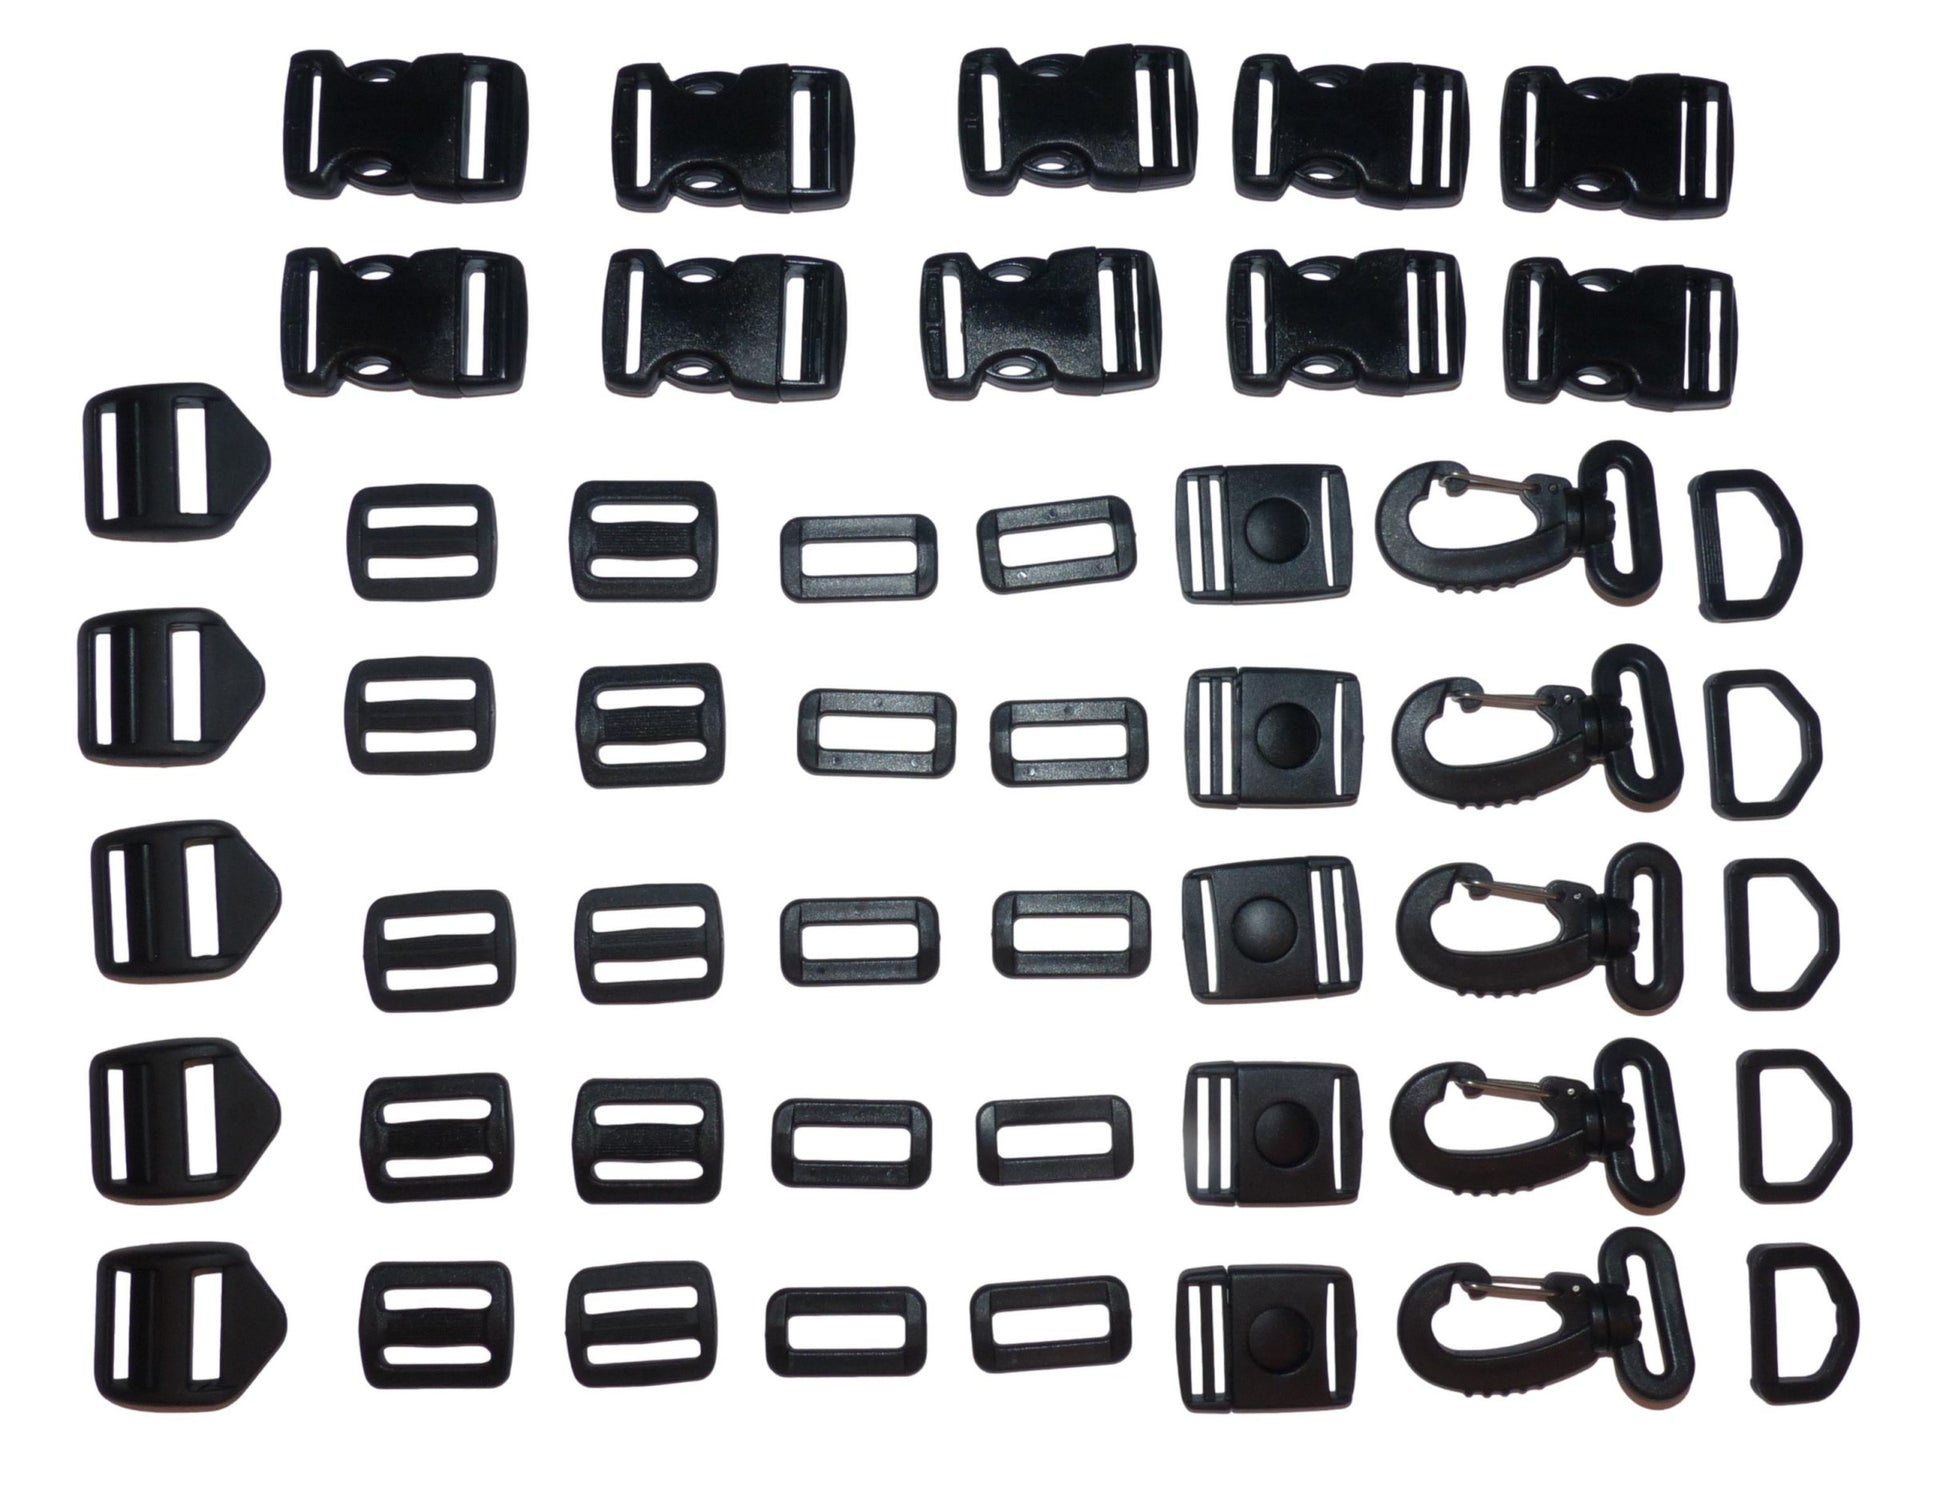 25mm Buckle Set with Quick Release, Triglide, Button, Snap Hooks, Ladderlock, Square & D Rings